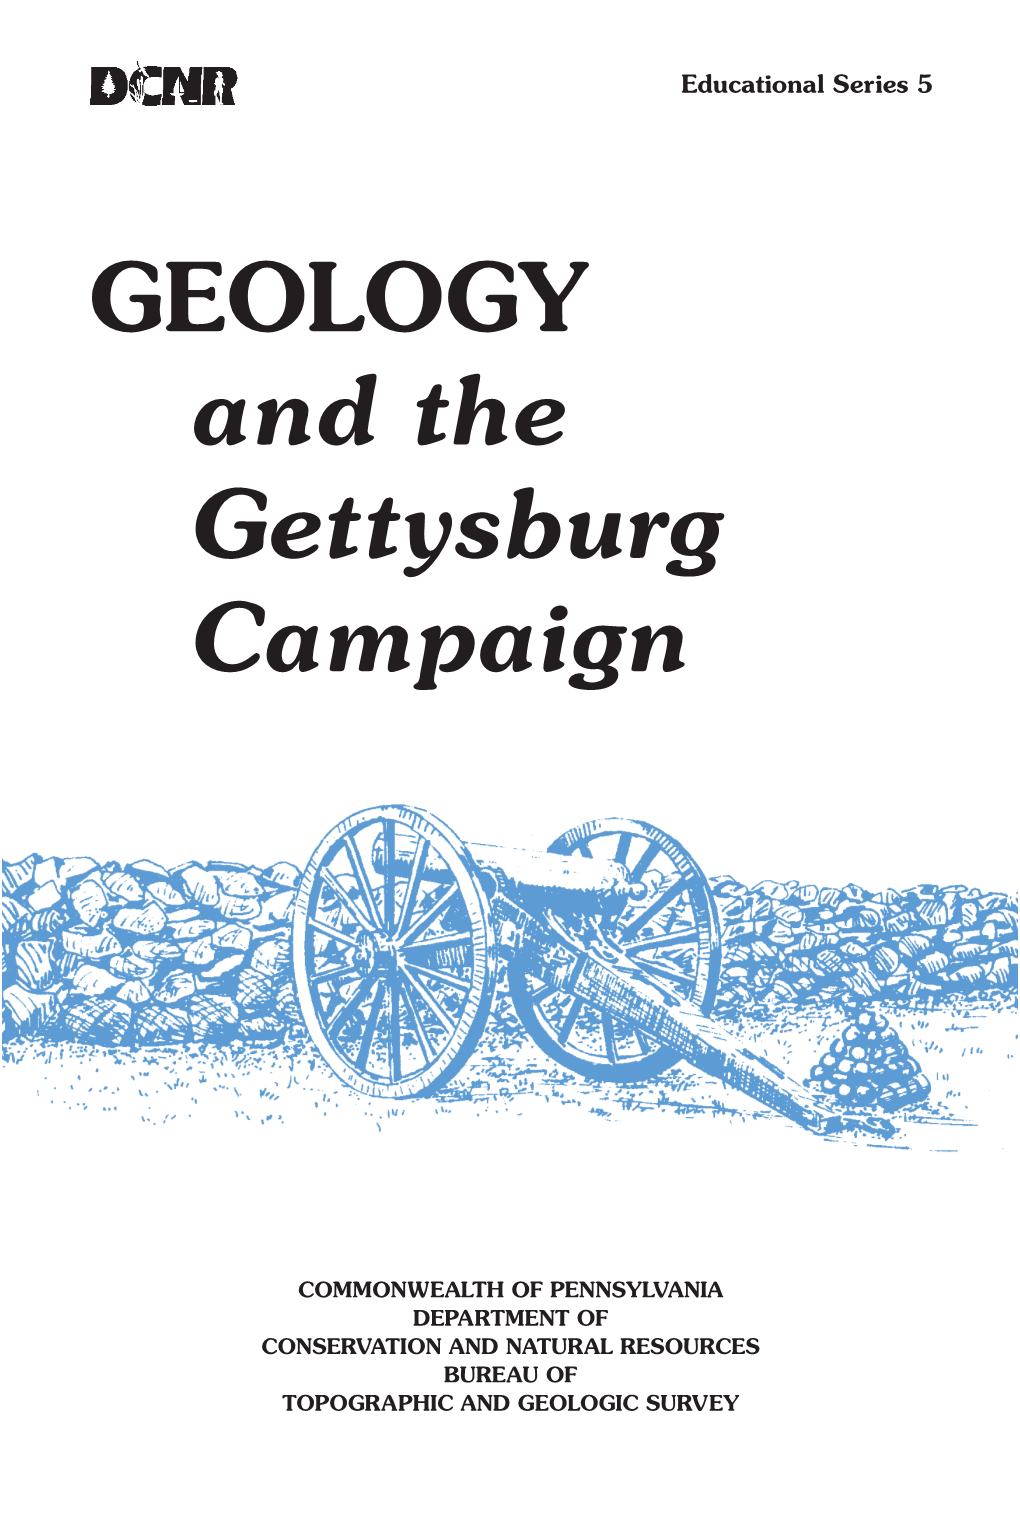 Geology of the Gettysburg Campaign